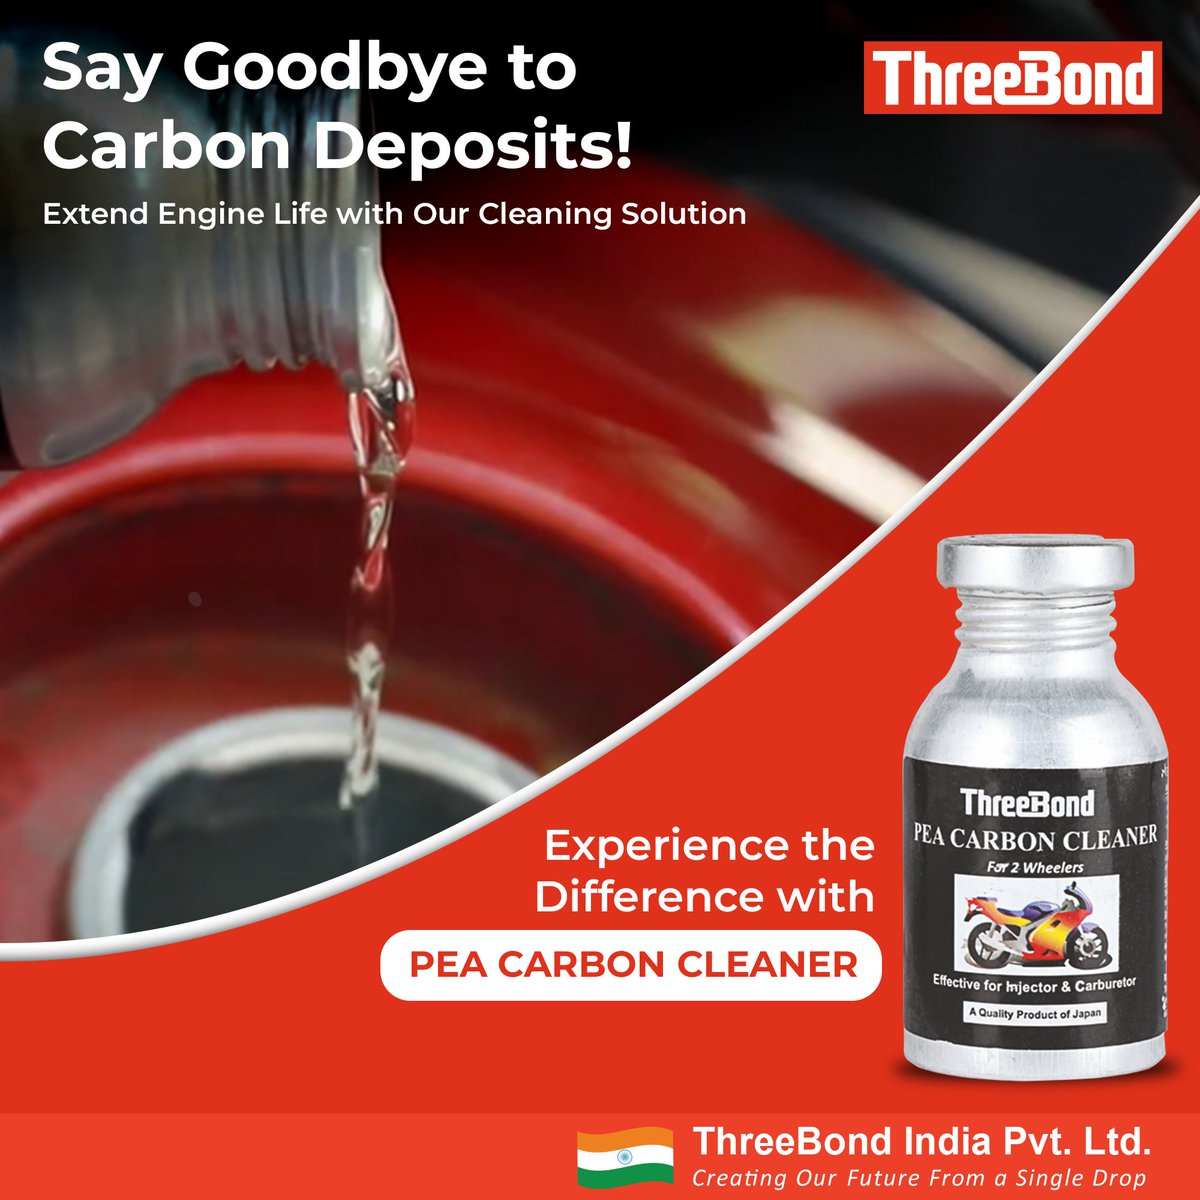 Boost Your Engine's Performance with ThreeBond's PEA Carbon Cleaner! Eliminate carbon deposits effortlessly for smoother acceleration and reduced emissions. 🚗💨 #EngineCare #PerformanceBoost #CleanerEngines